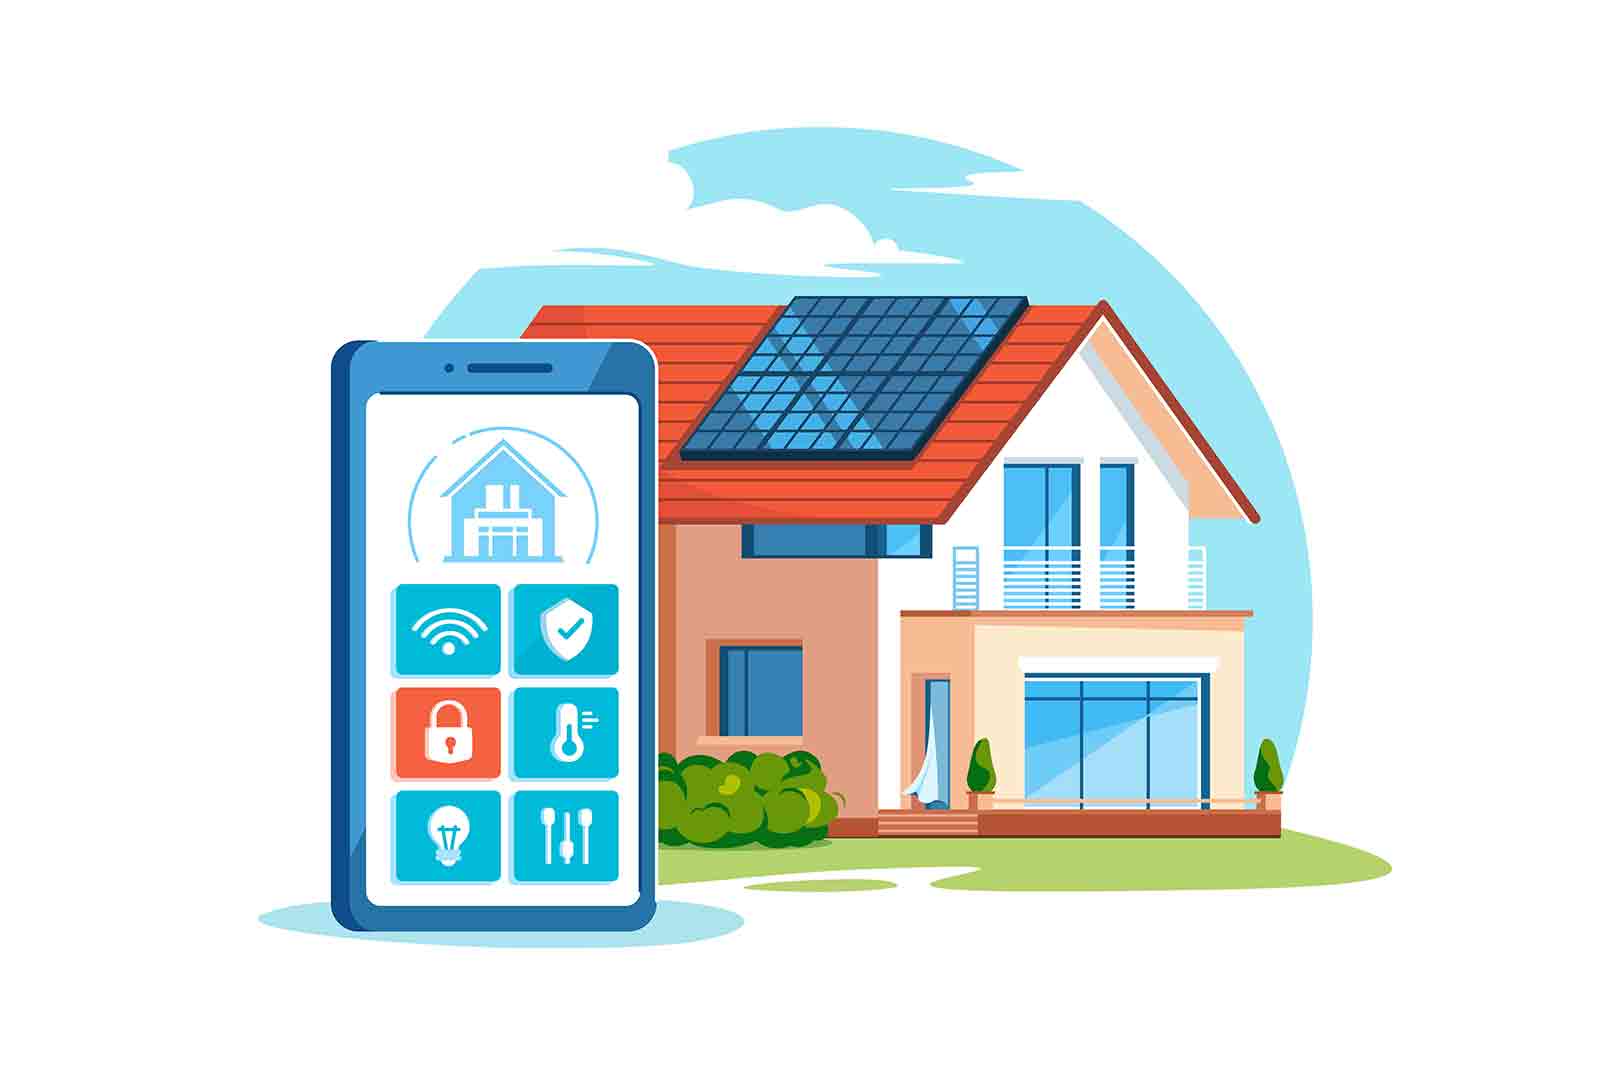 Smart house management system for faster control vector illustration. Control your home via smartphone app flat style. Technology concept